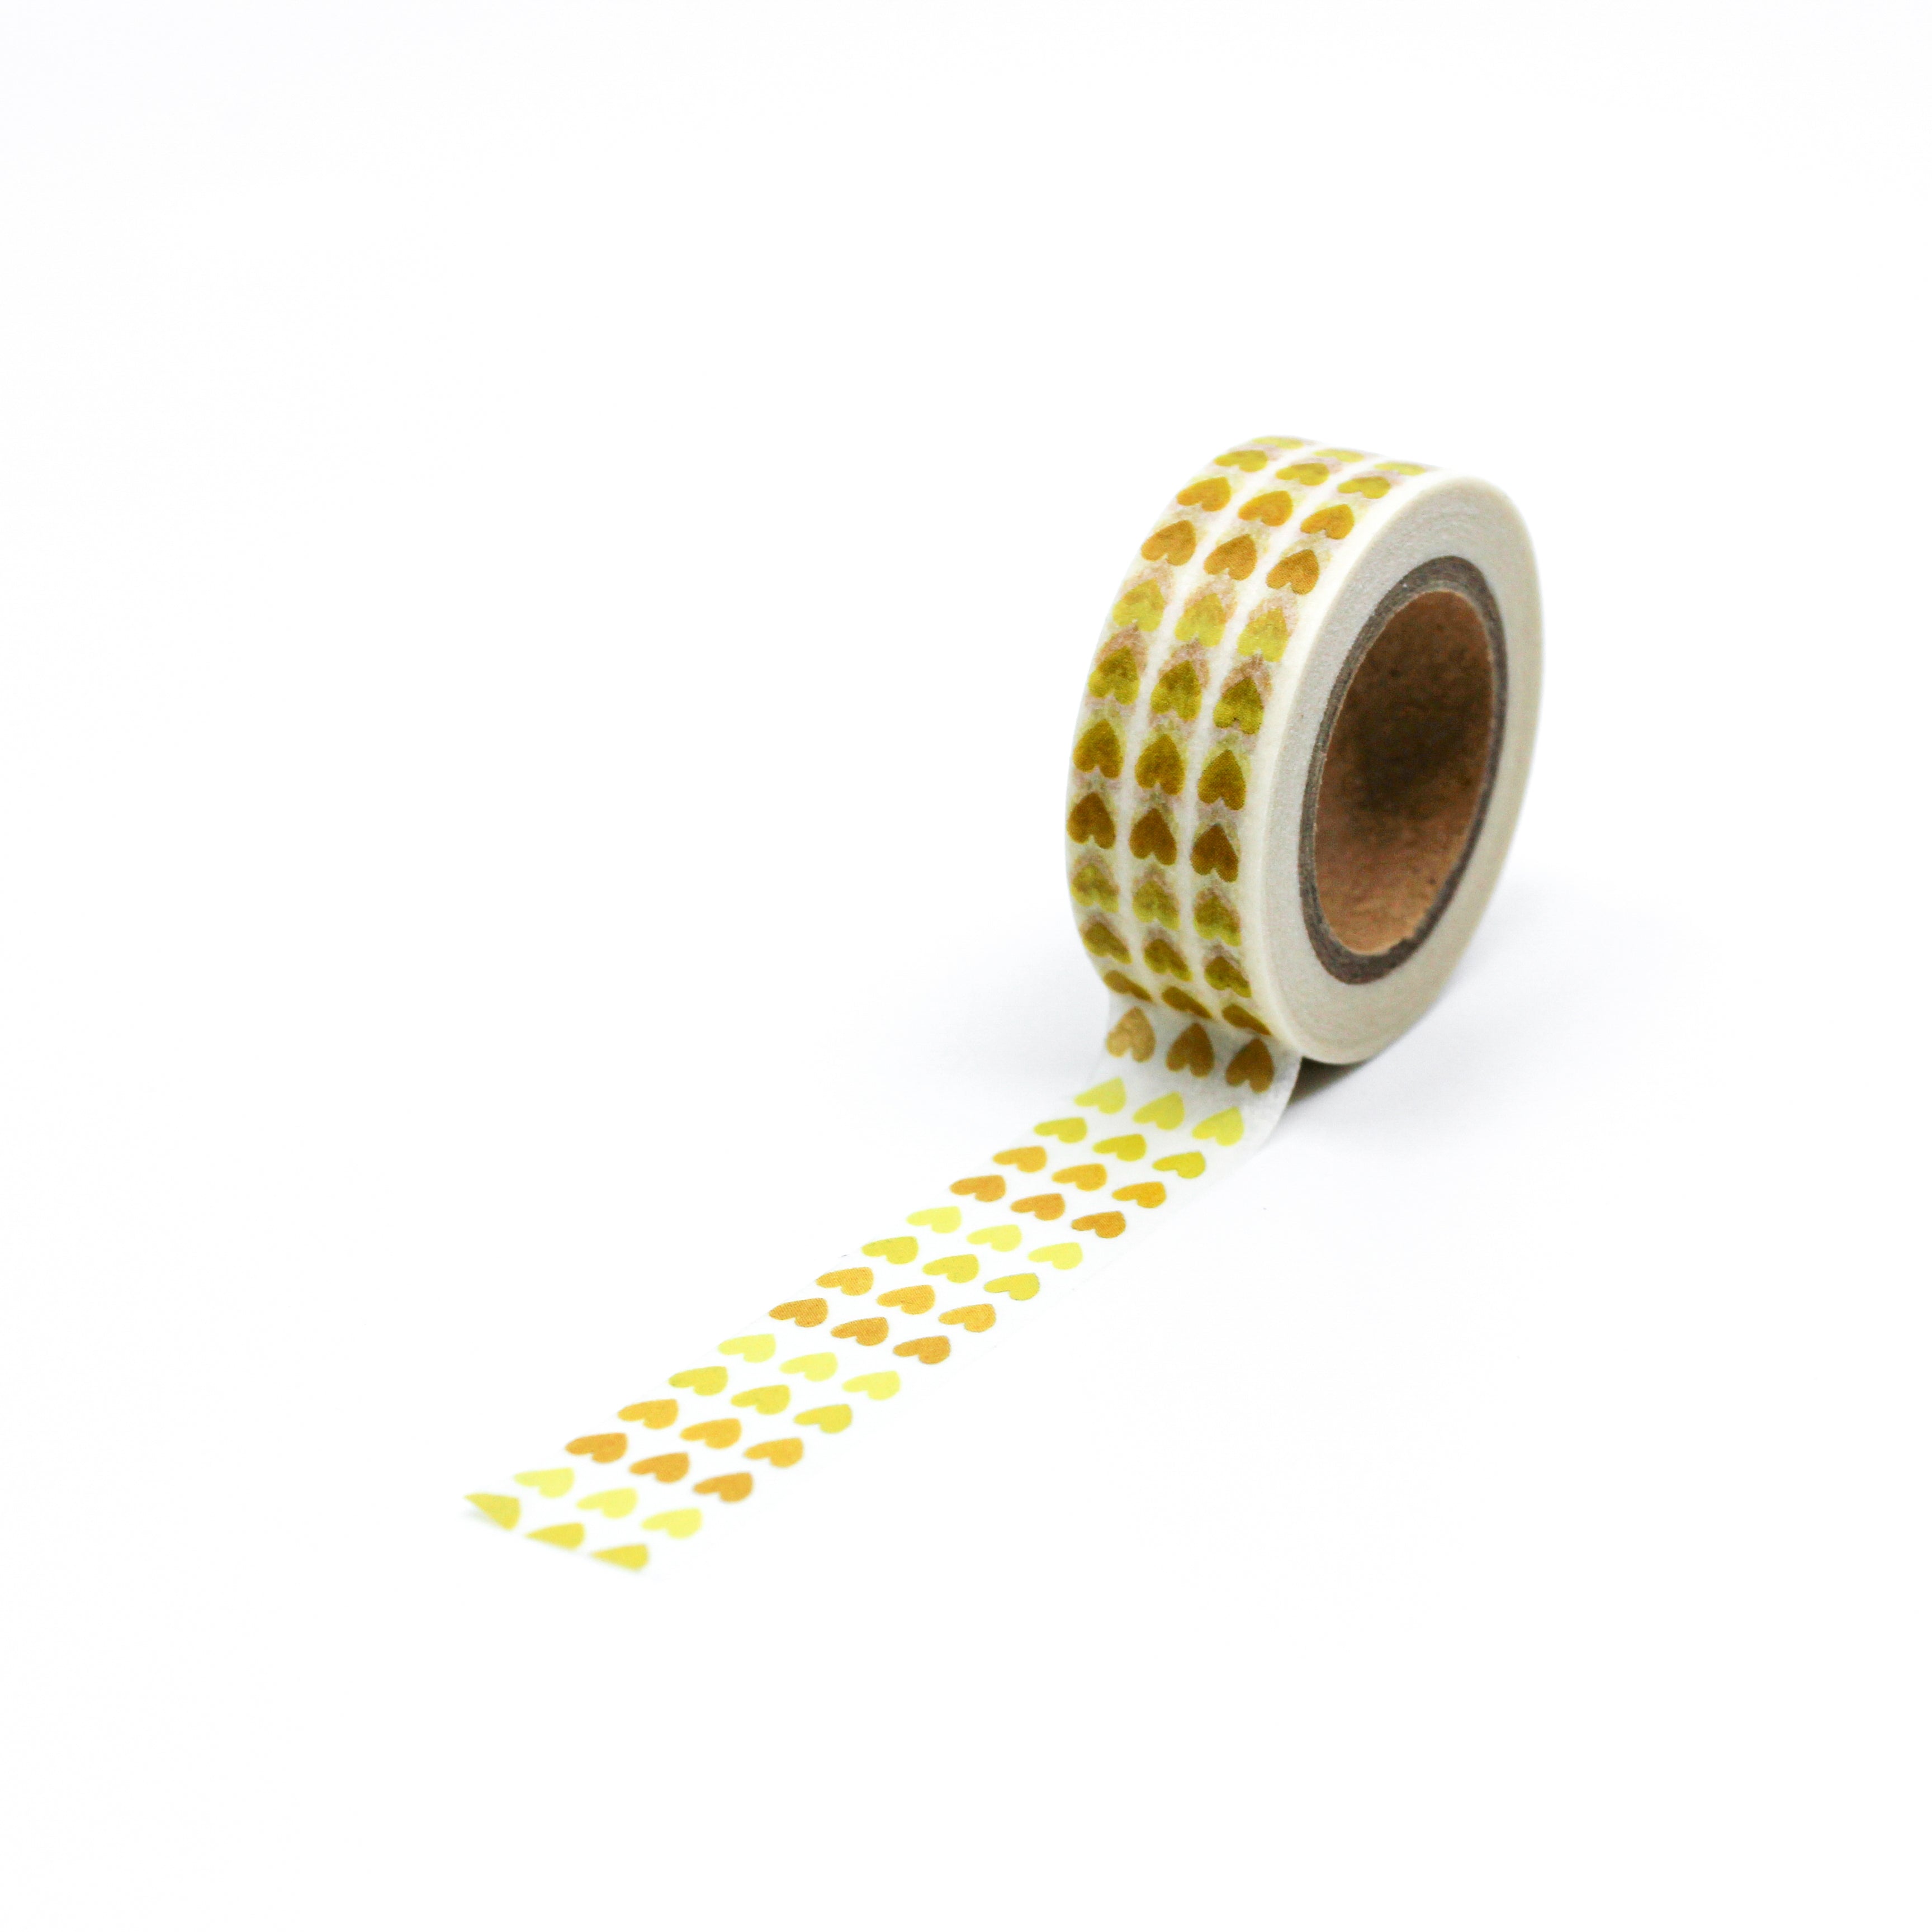 This is a full pattern repeat view of yellow tiny hearts washi tape BBB Supplies Craft Shop